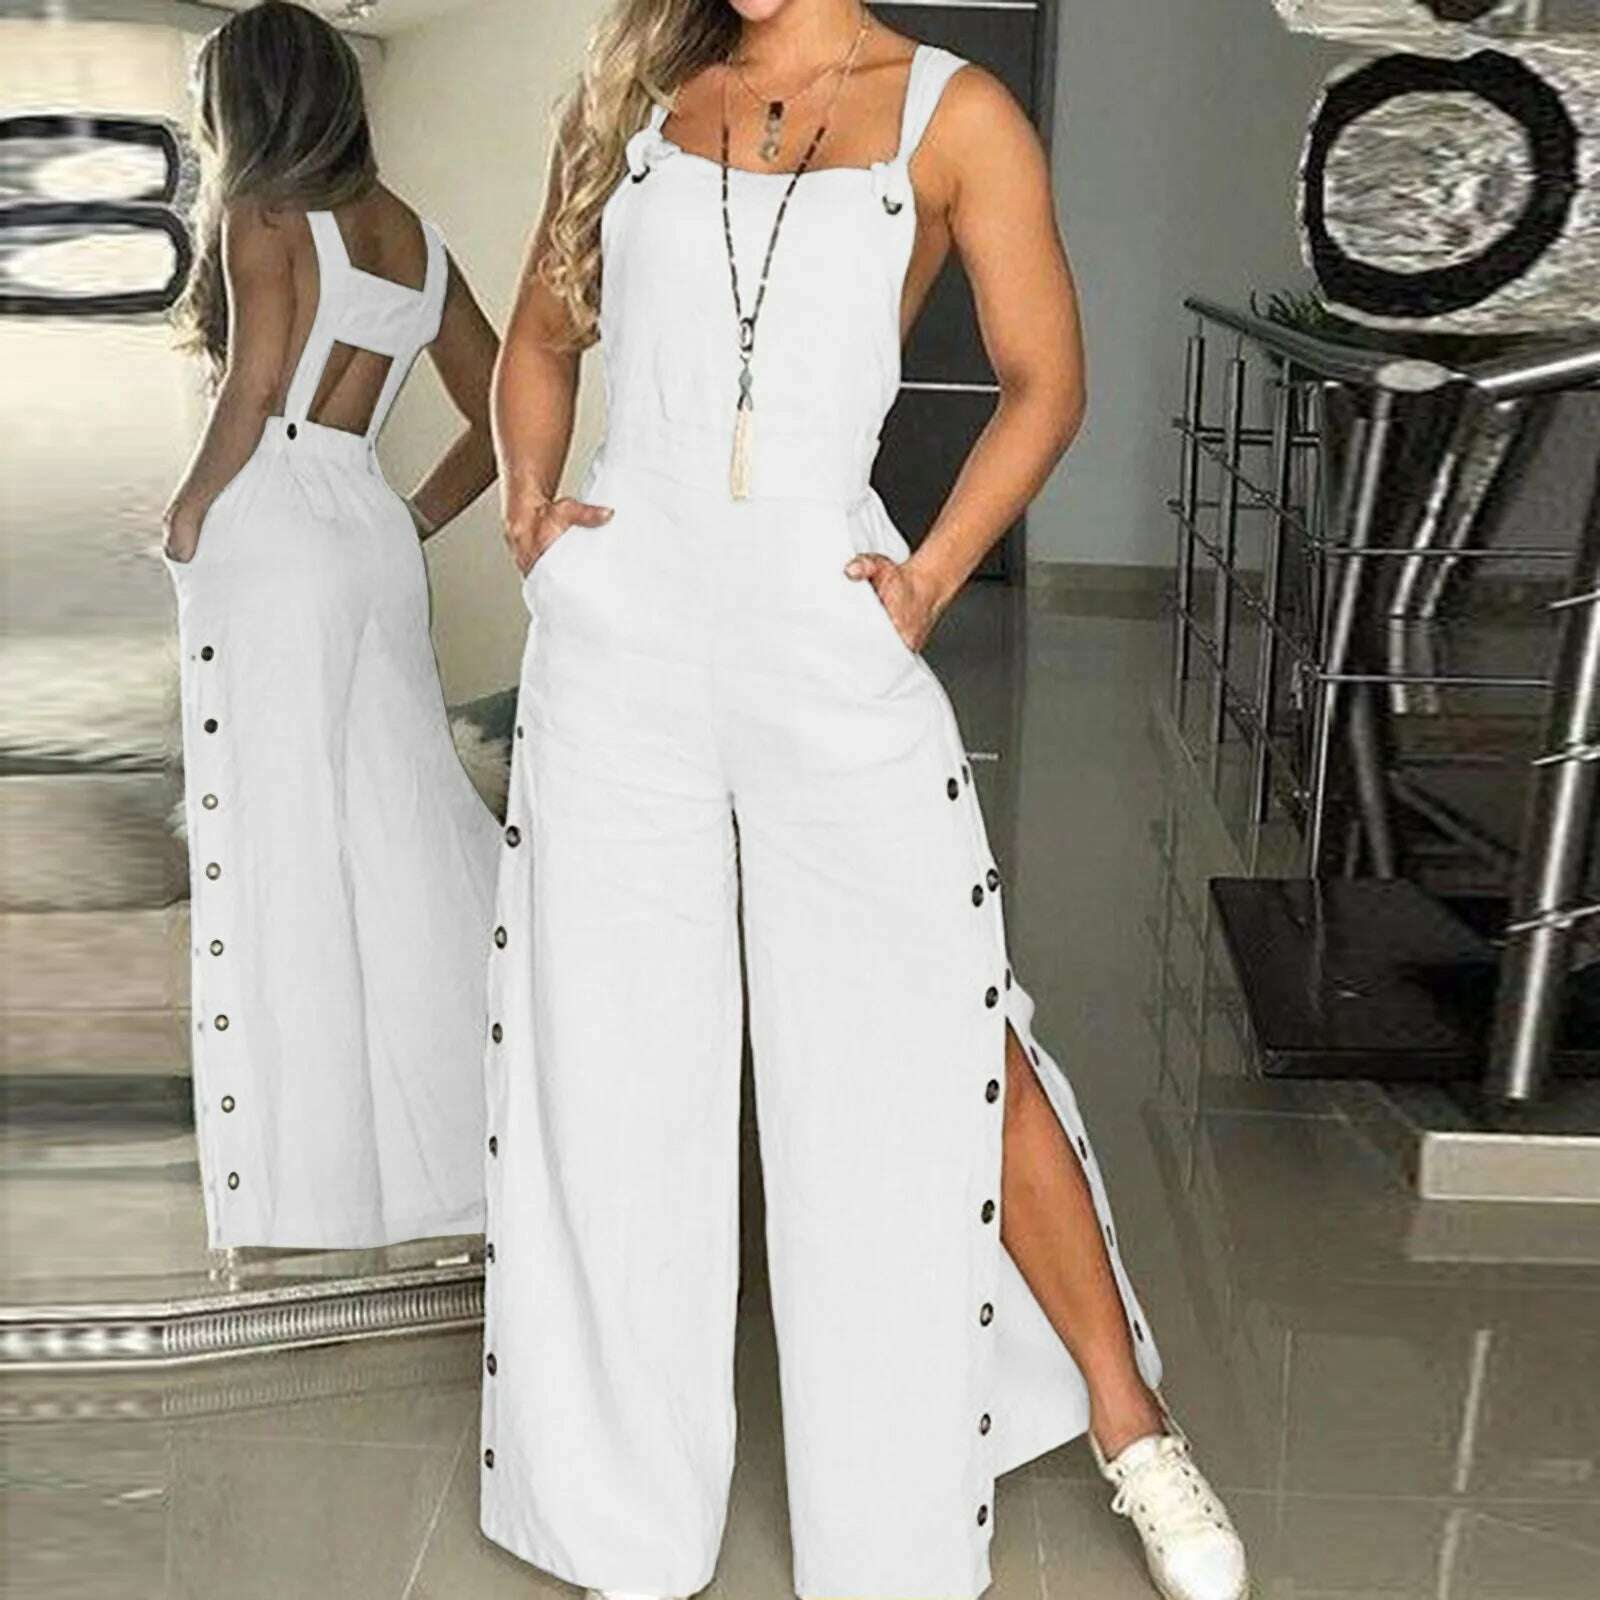 KIMLUD, Button Overalls for Women Summer Jumpsuit Solid Casual Openings Button Wide Leg Suspender Pants Overalls with Pockets, White / S / China, KIMLUD Womens Clothes